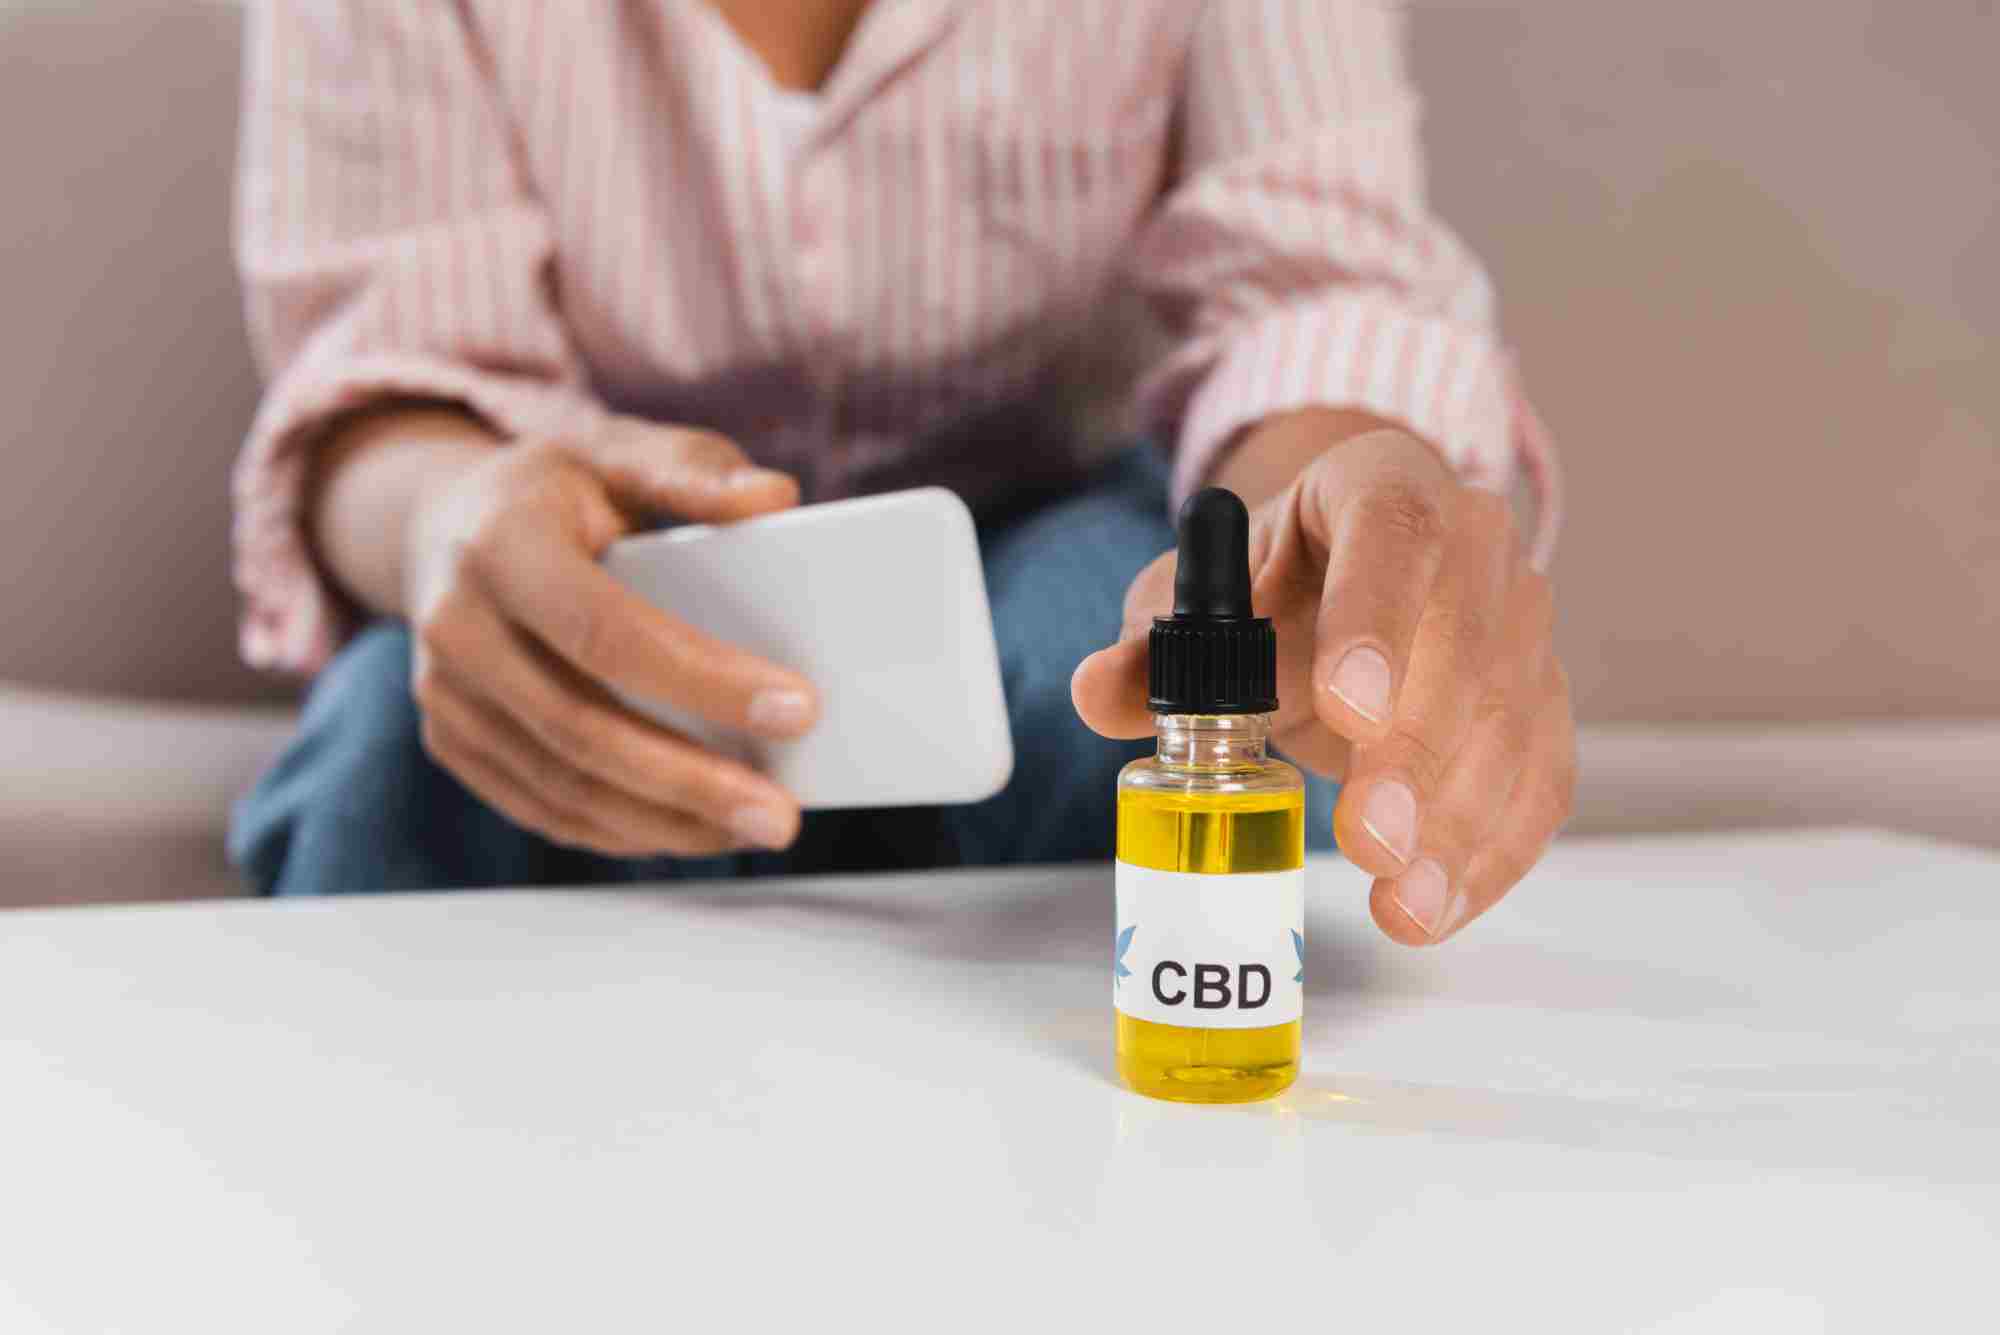 man with phone reaching for a CBD bottle